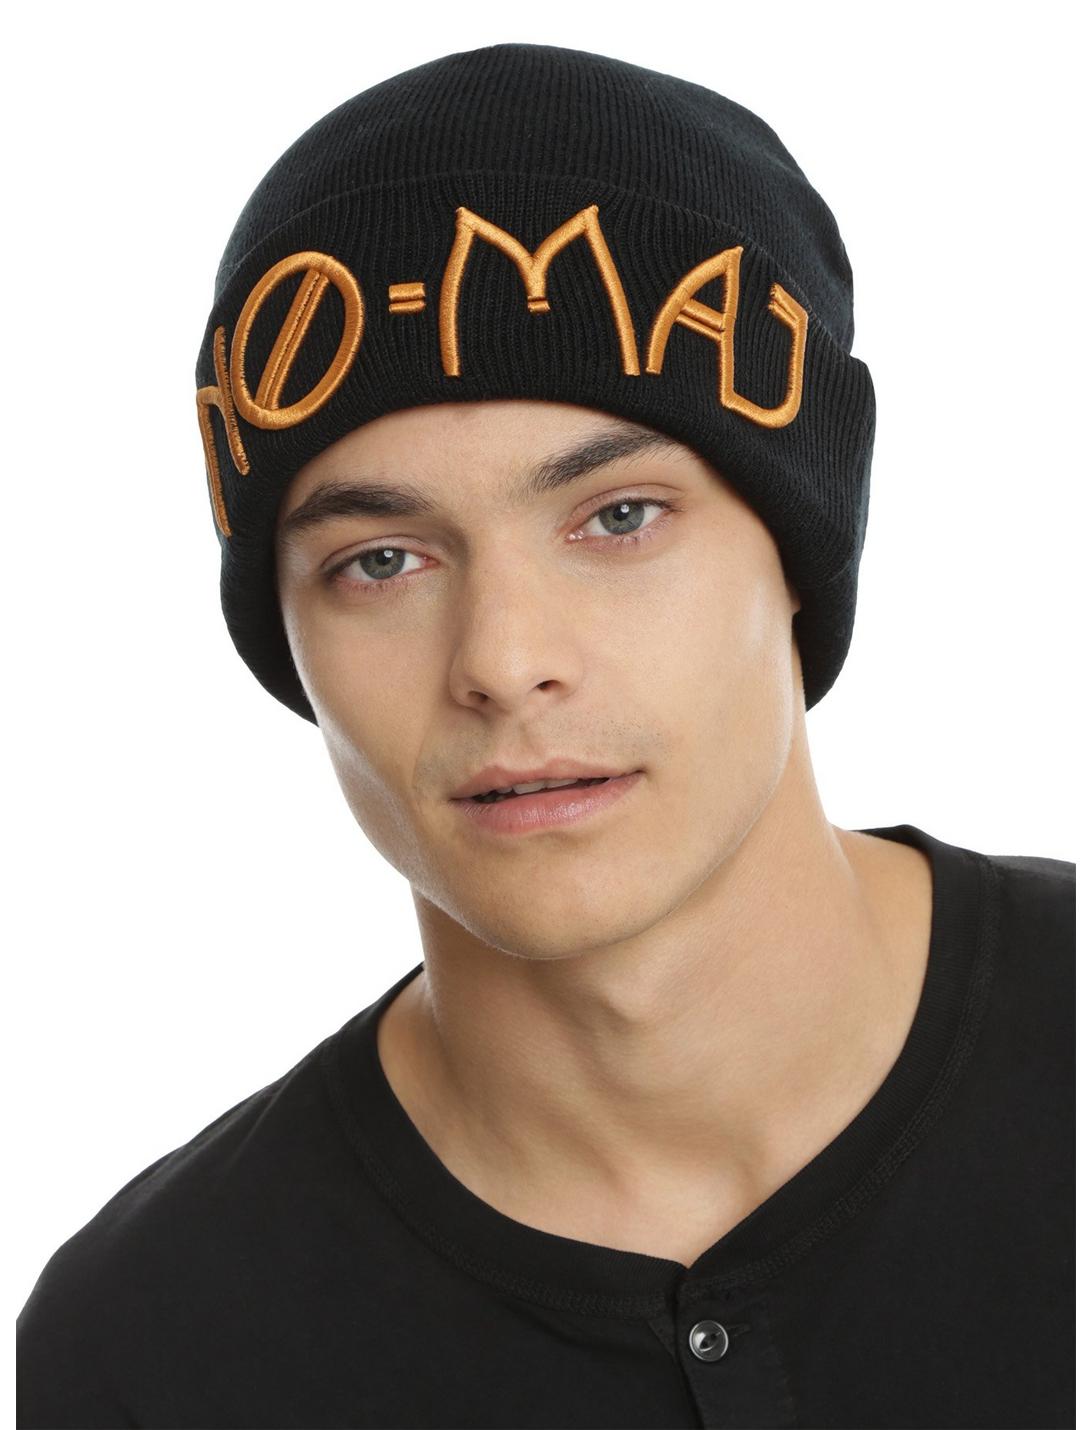 Fantastic Beasts And Where To Find Them No-Maj Beanie, , hi-res